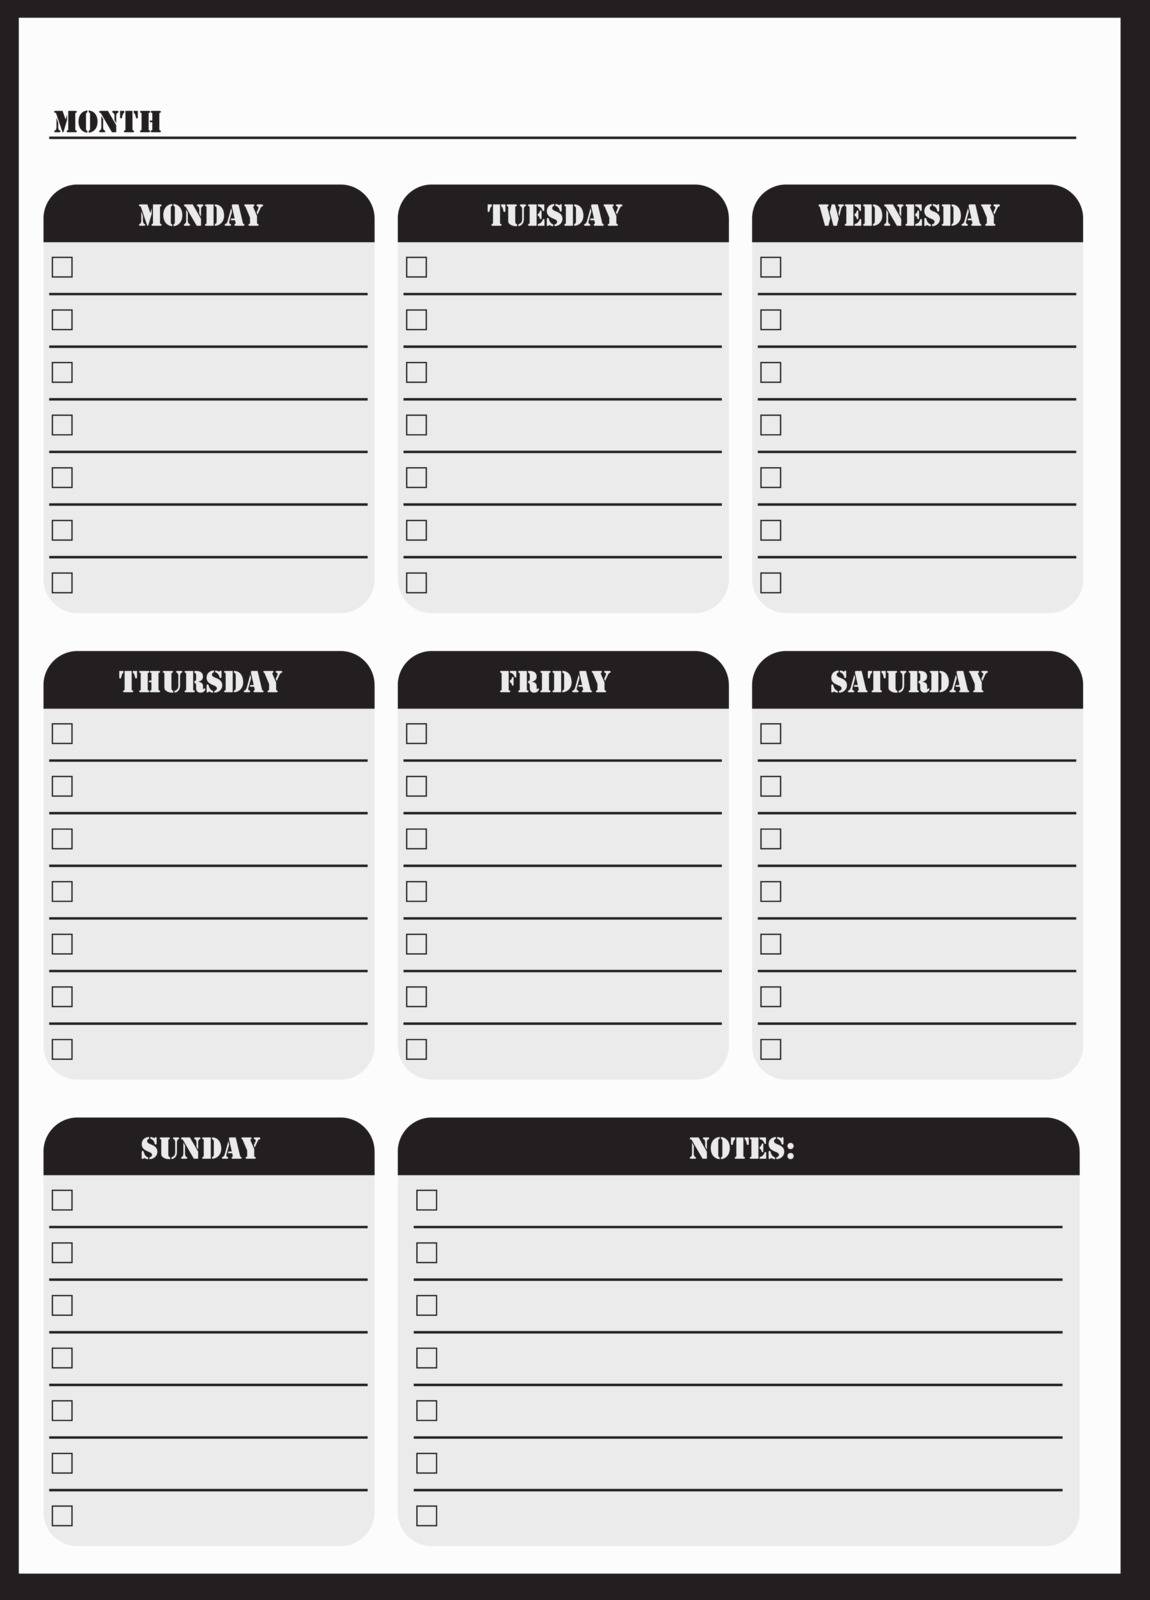 Dry erase board for home or office, Daily reminders for you